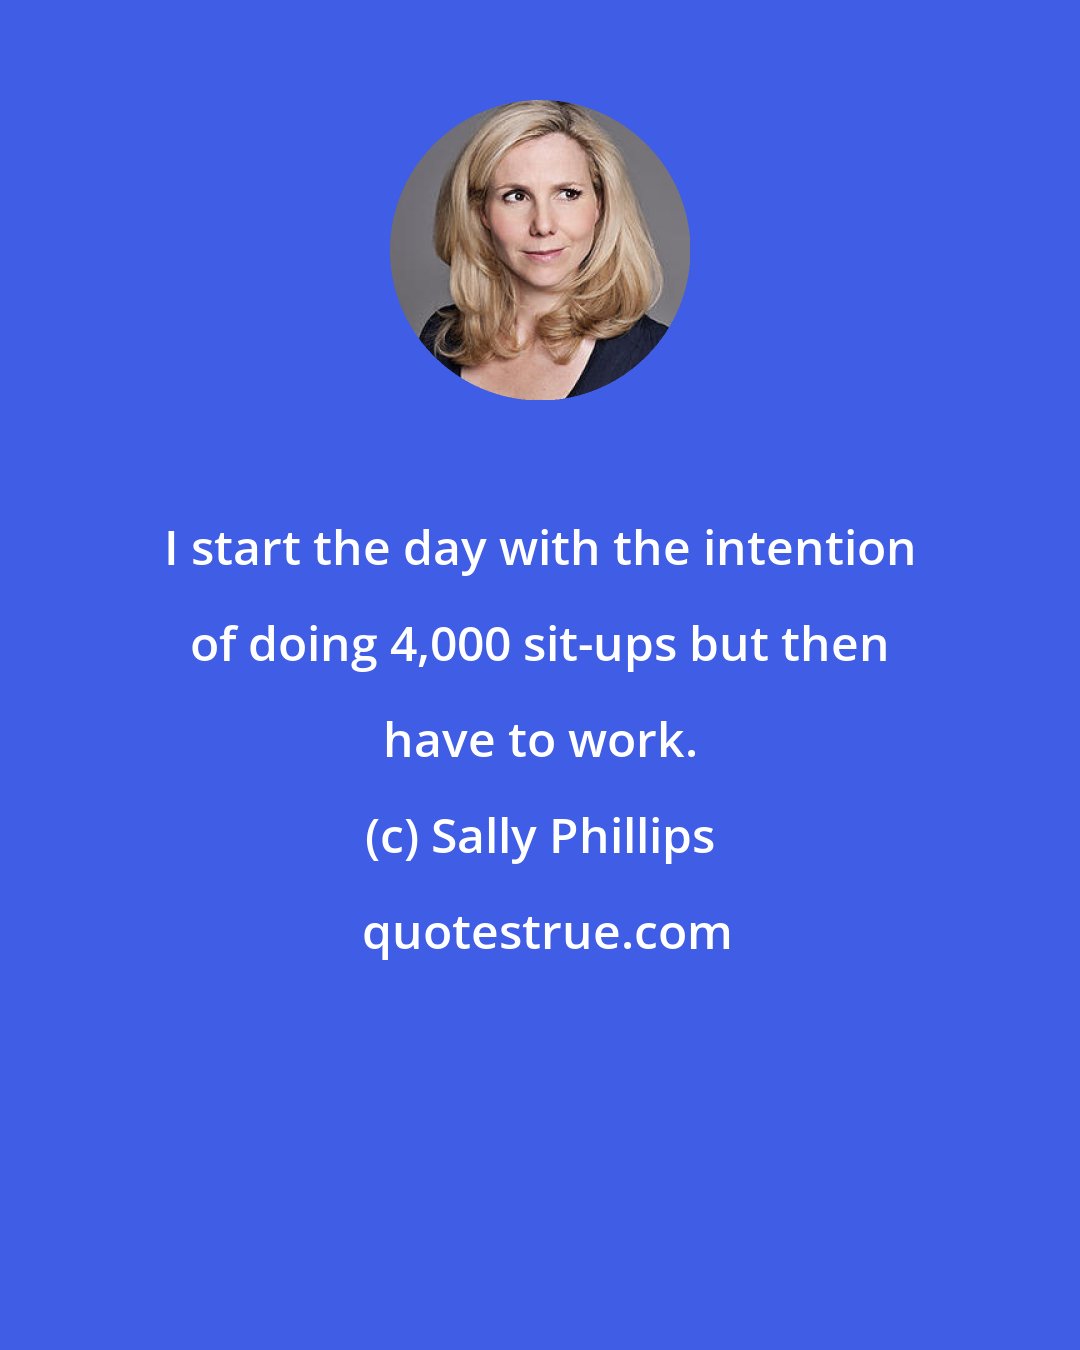 Sally Phillips: I start the day with the intention of doing 4,000 sit-ups but then have to work.